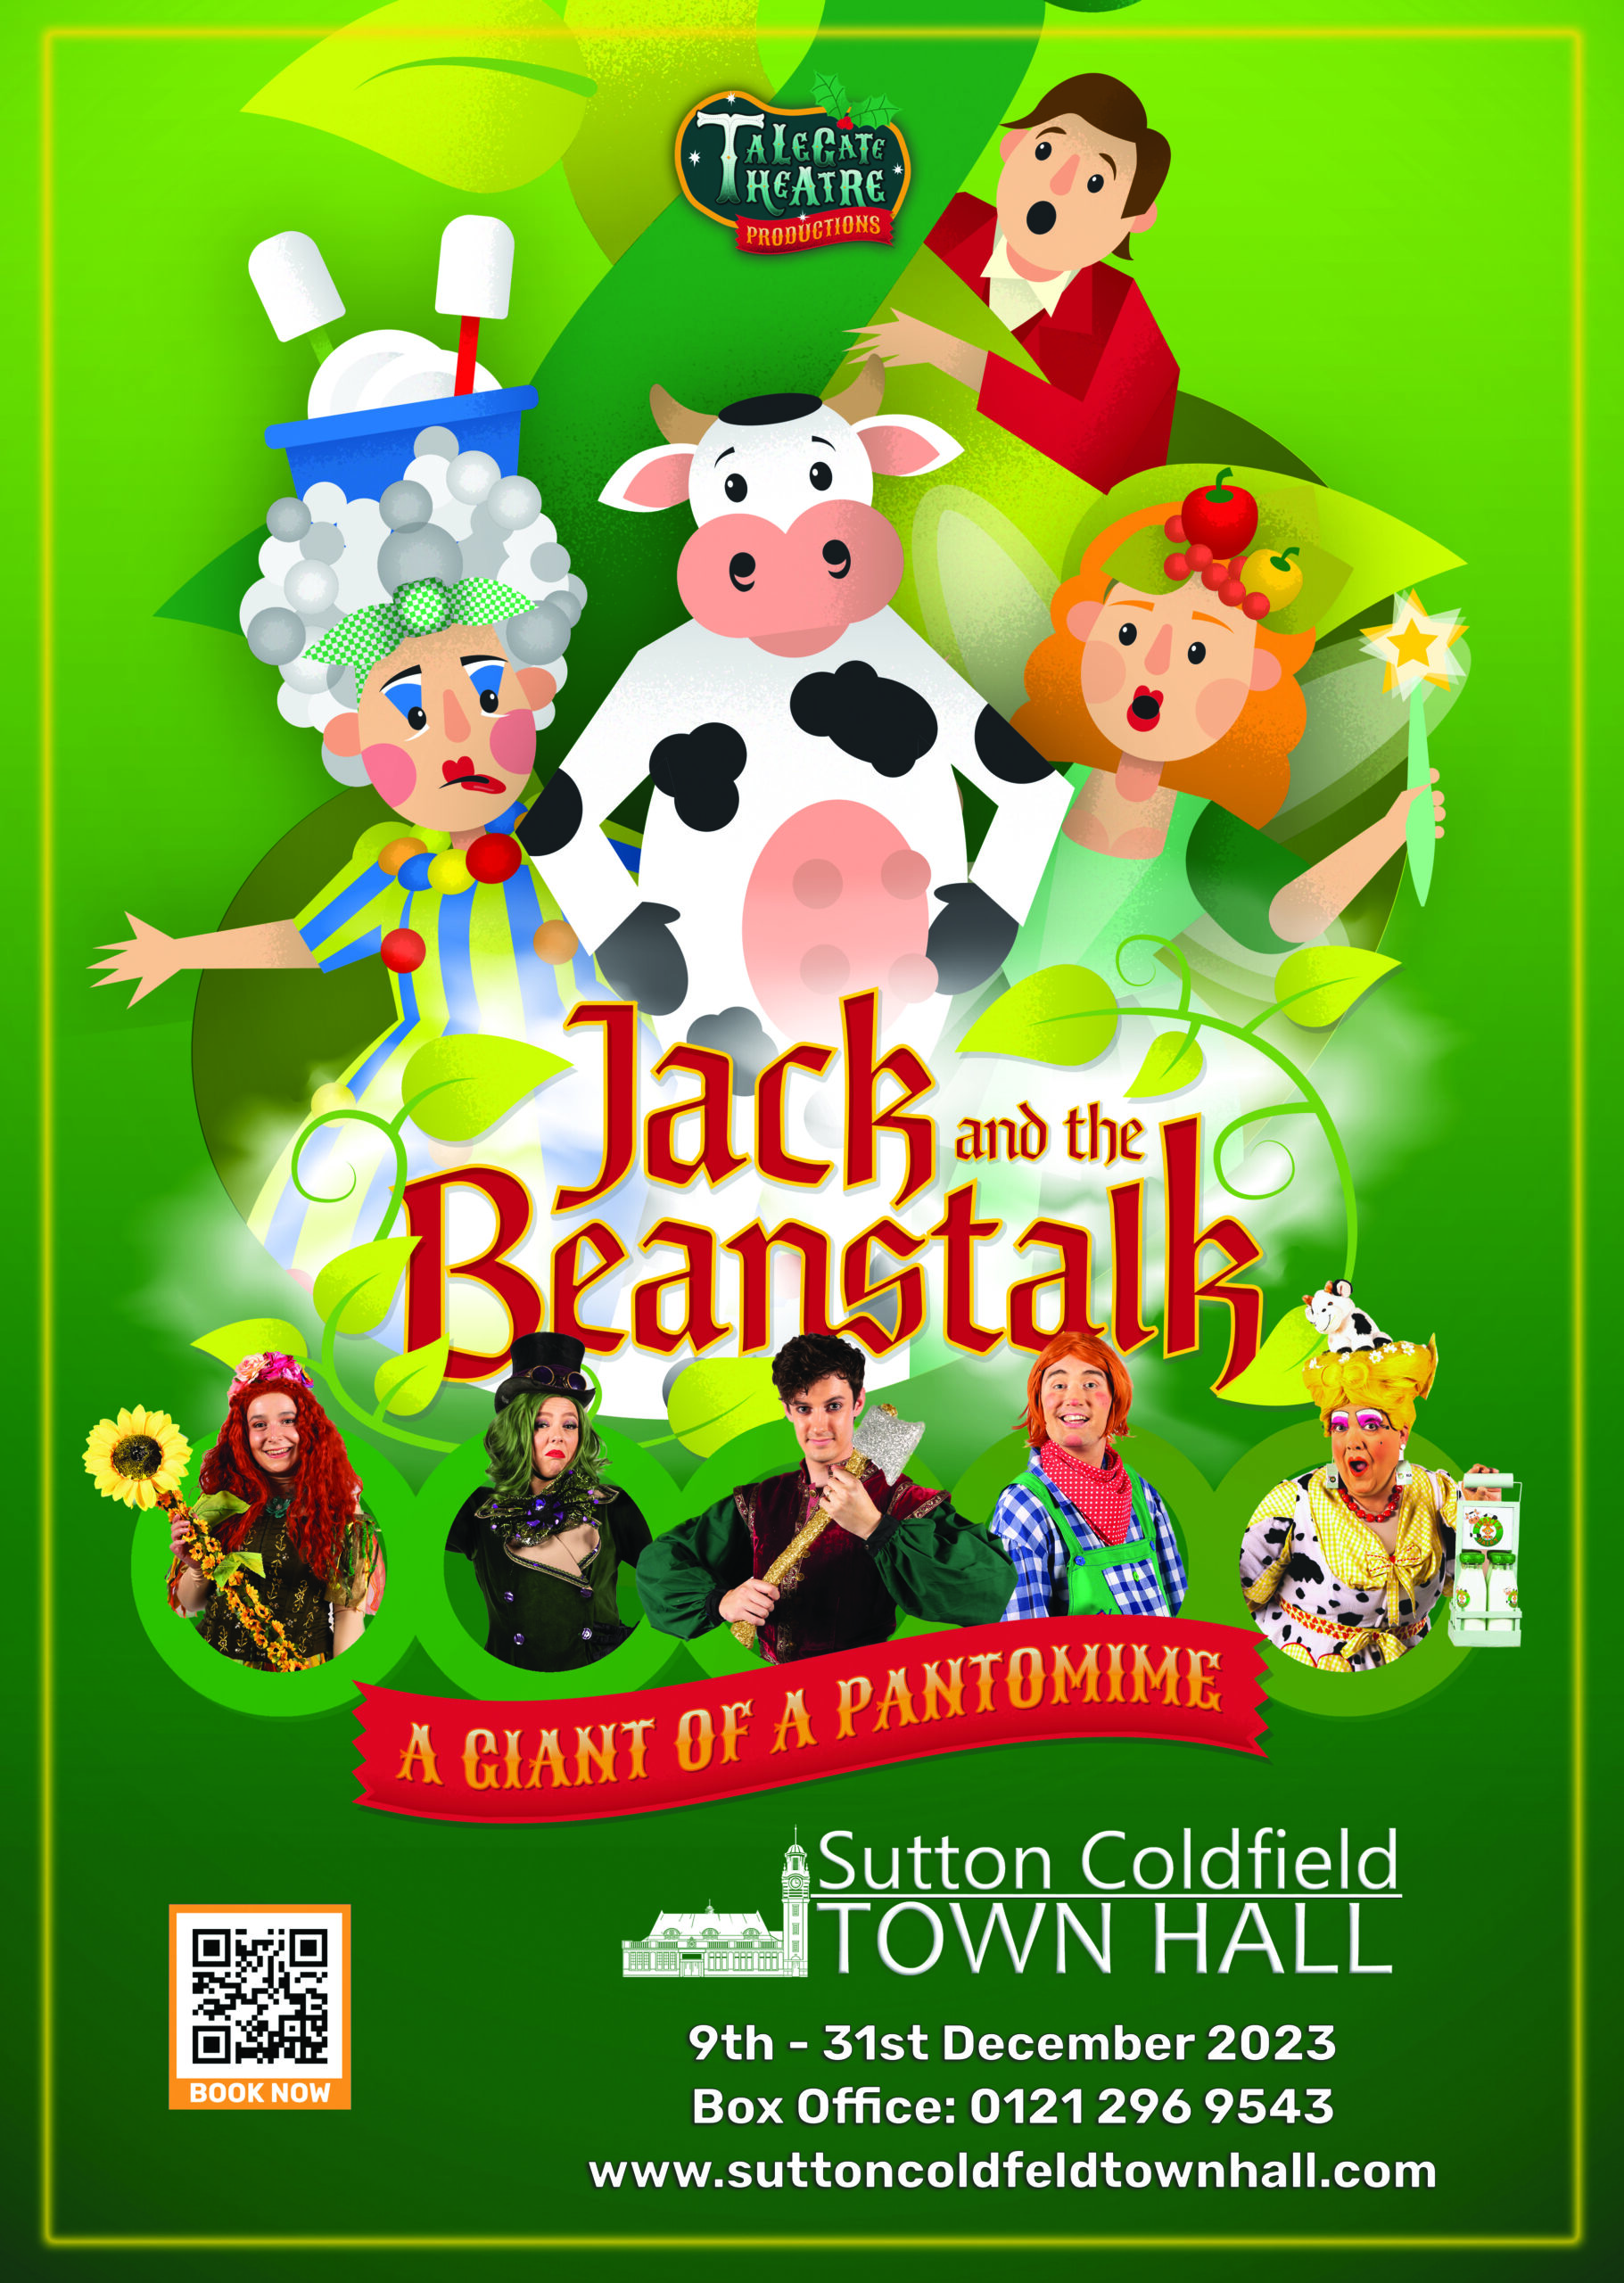 Book your tickets for Jack & The Beanstalk at SCTH